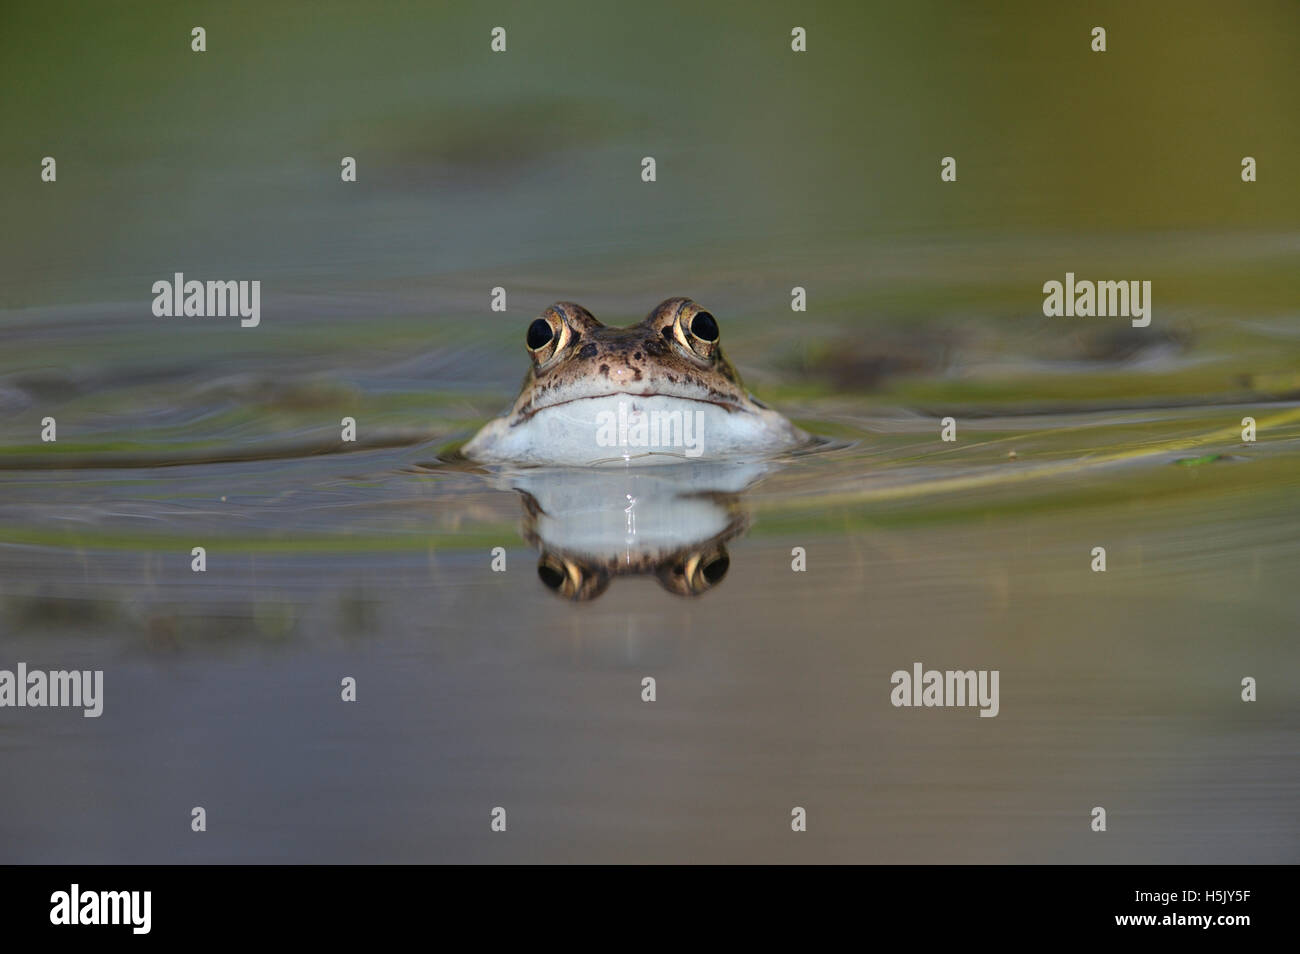 Common Frog in garden pond with reflection, about to croak, Bentley, Suffolk, March Stock Photo